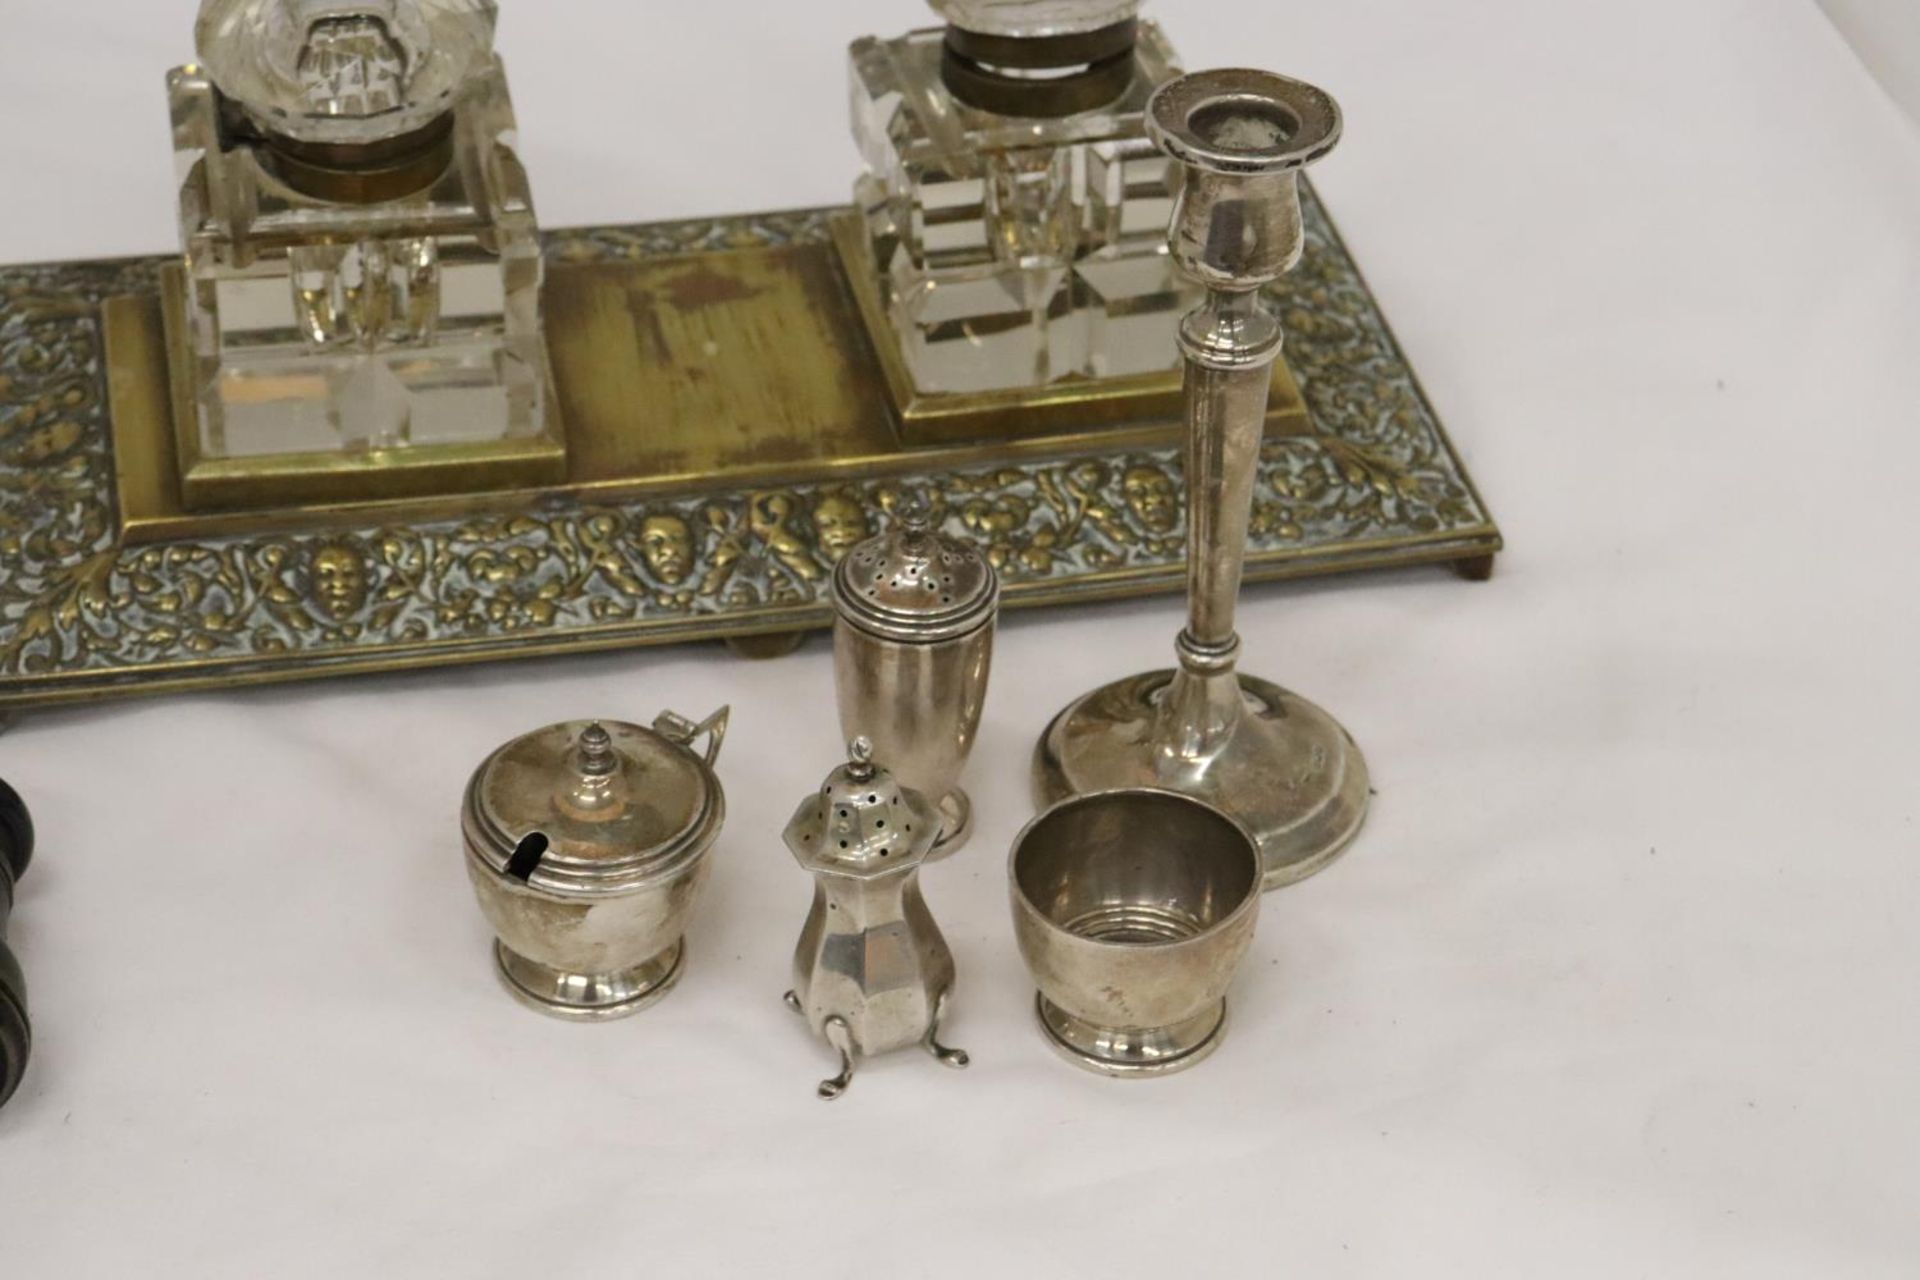 A VINTAGE FOOTED BRASS DOUBLE INK WELL TOGETHER WITH OPERA GLASSES AND VARIOUS SILVER PLATE - Image 5 of 11